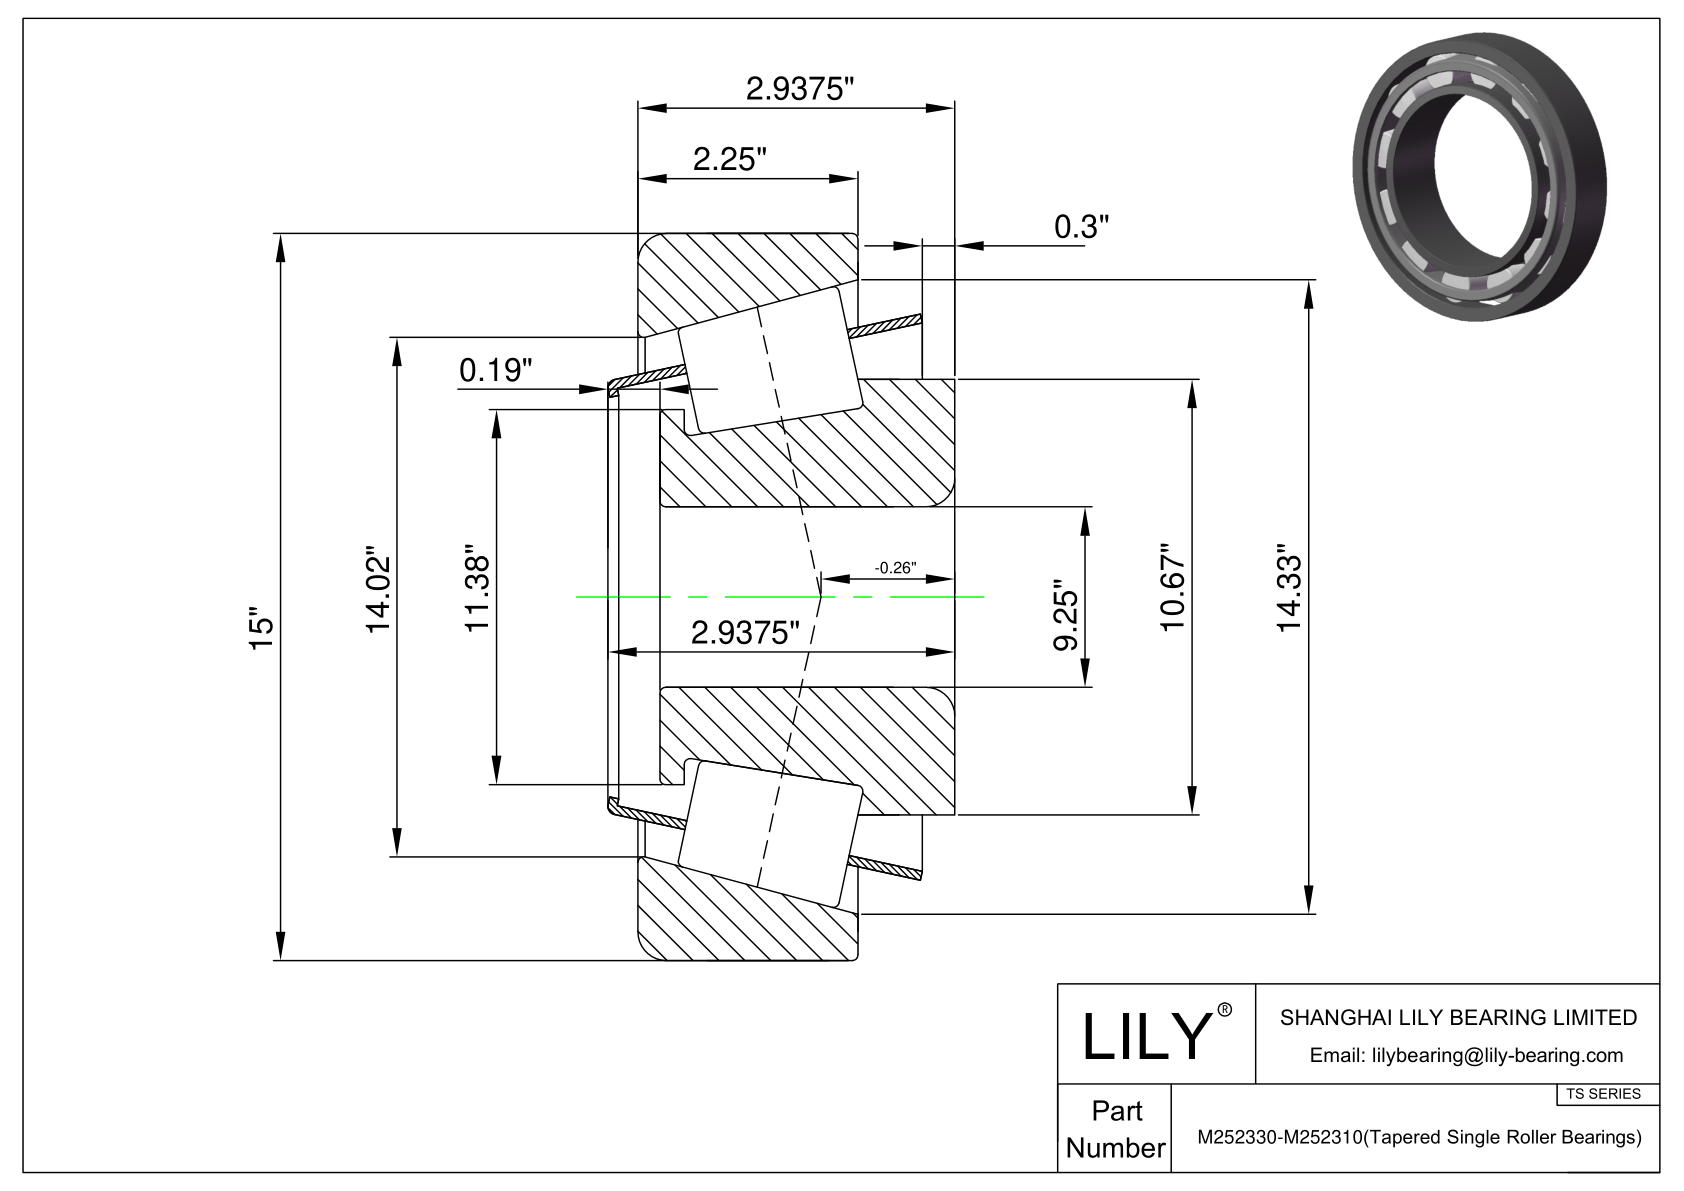 M252330-M252310 TS (Tapered Single Roller Bearings) (Imperial) cad drawing